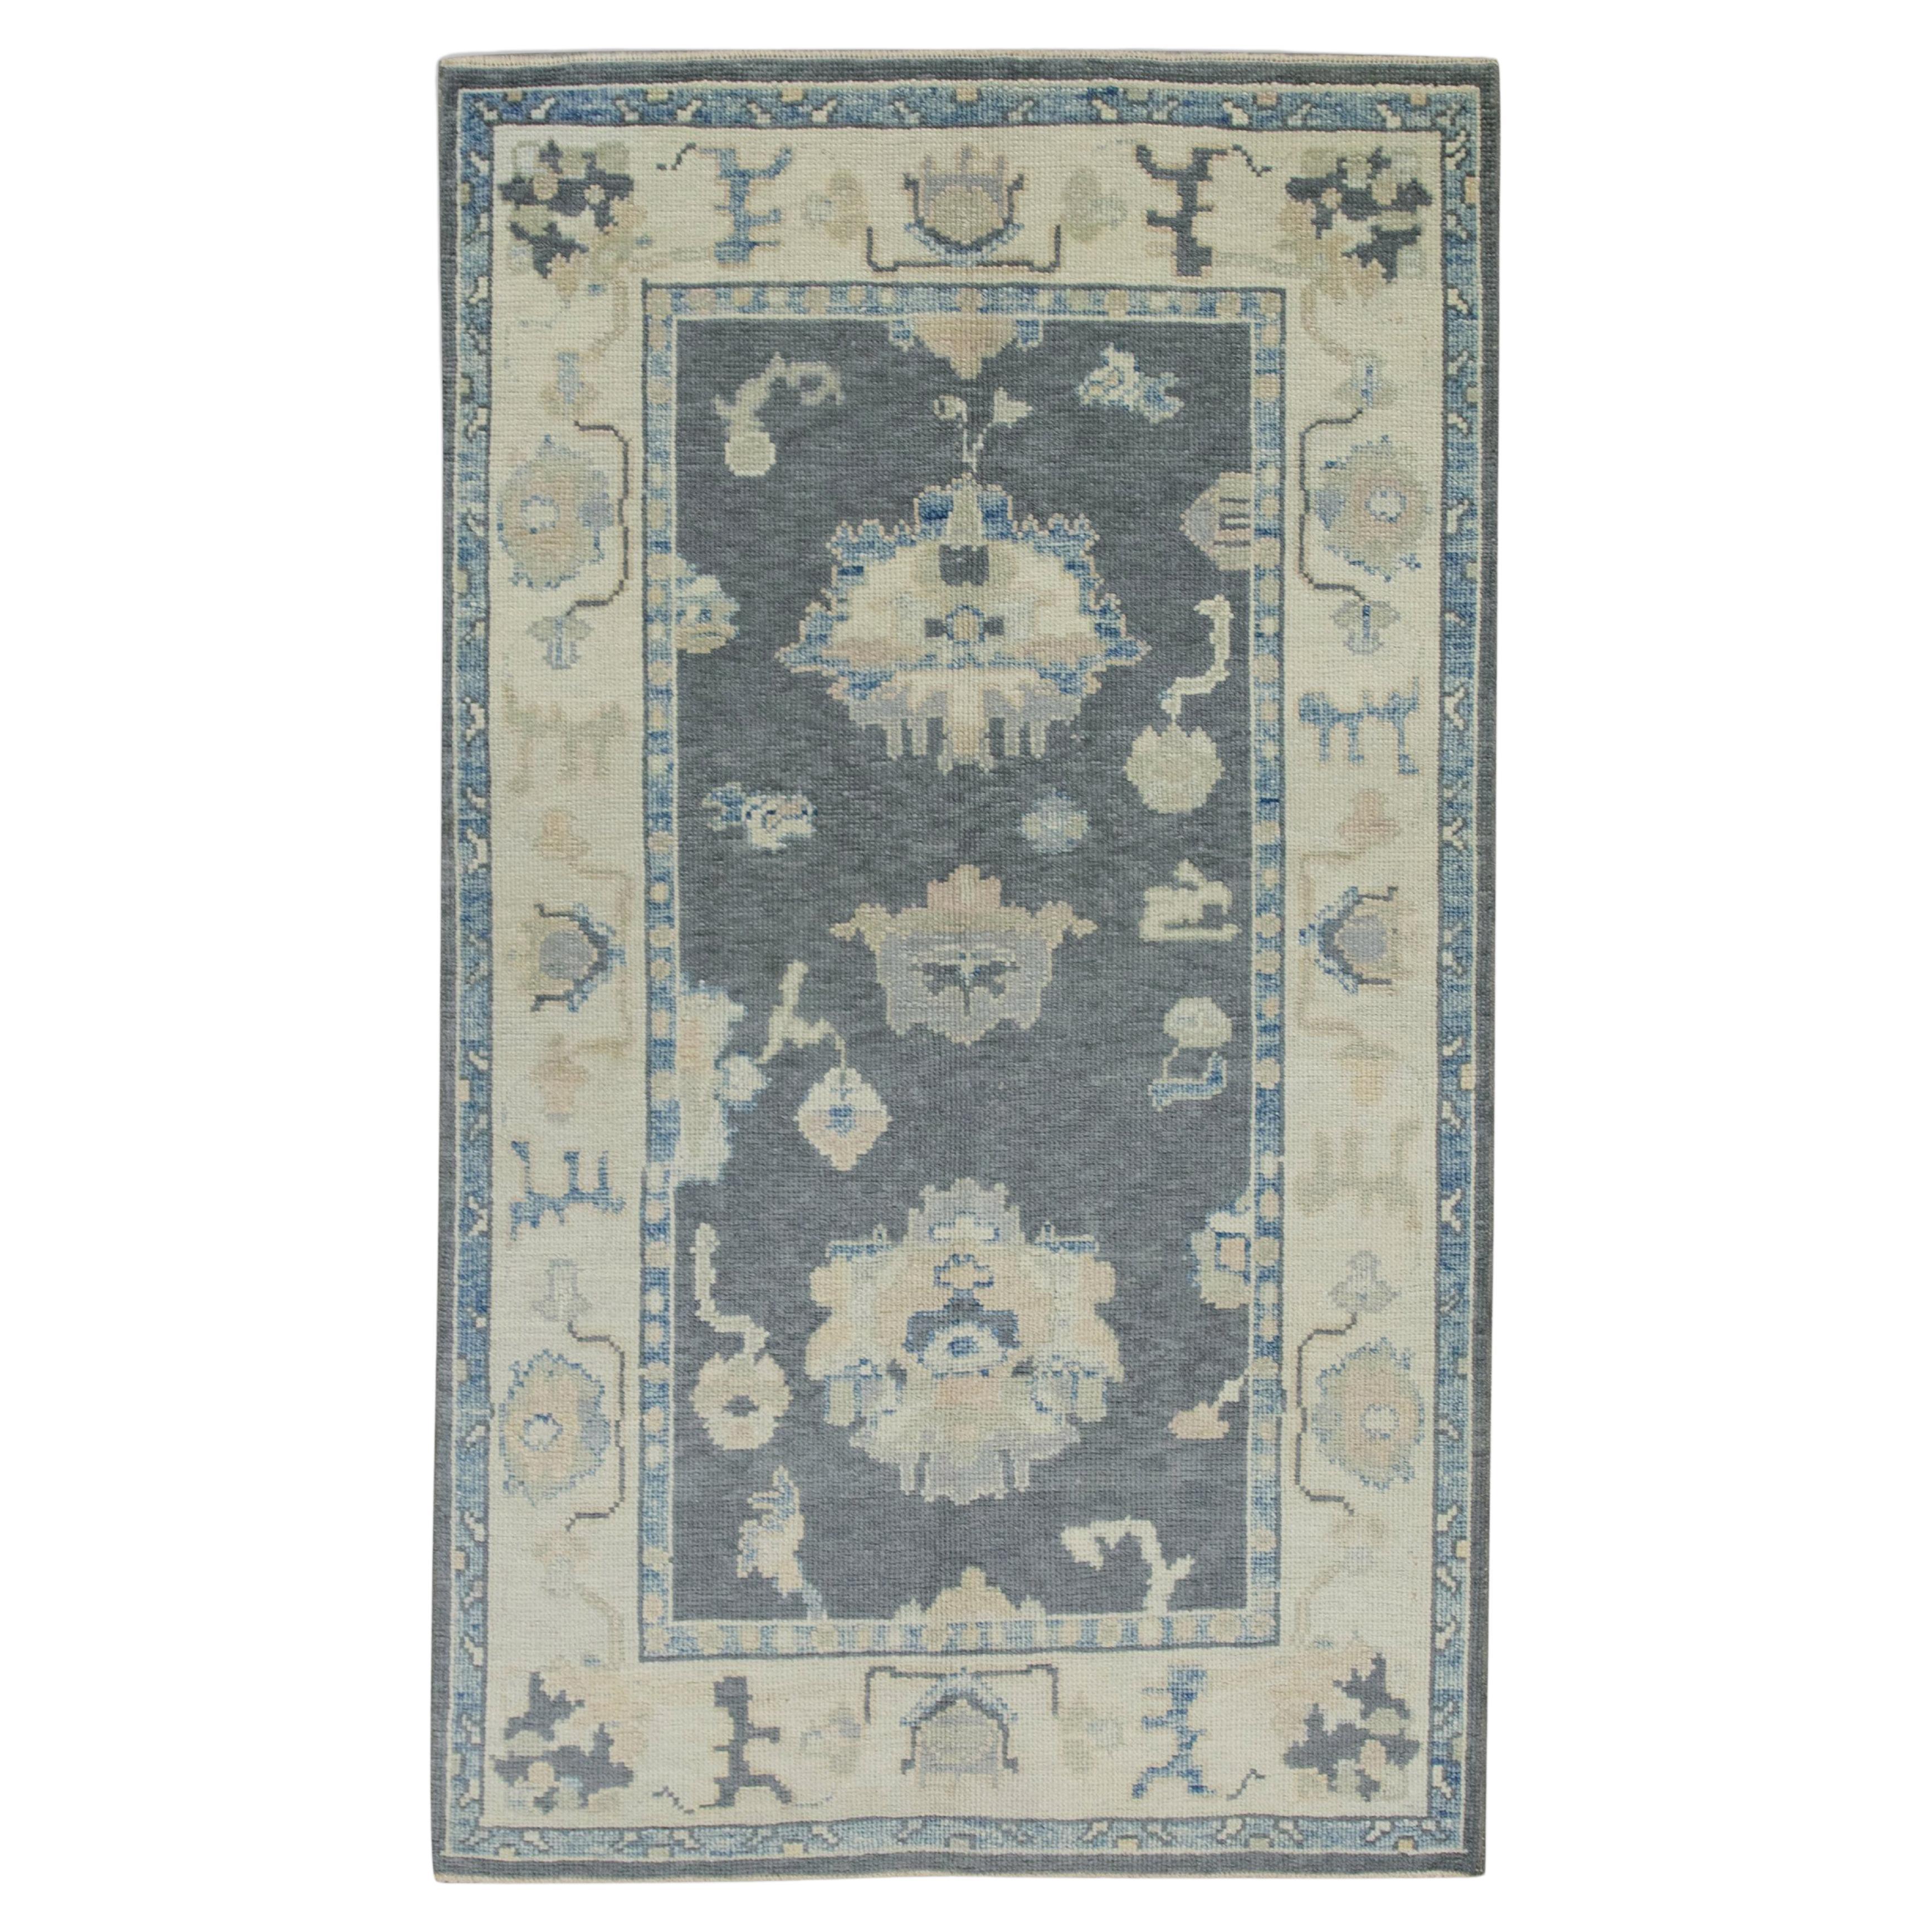 Gray Floral Design Handwoven Wool Turkish Oushak Rug 3'10" x 6'2" For Sale